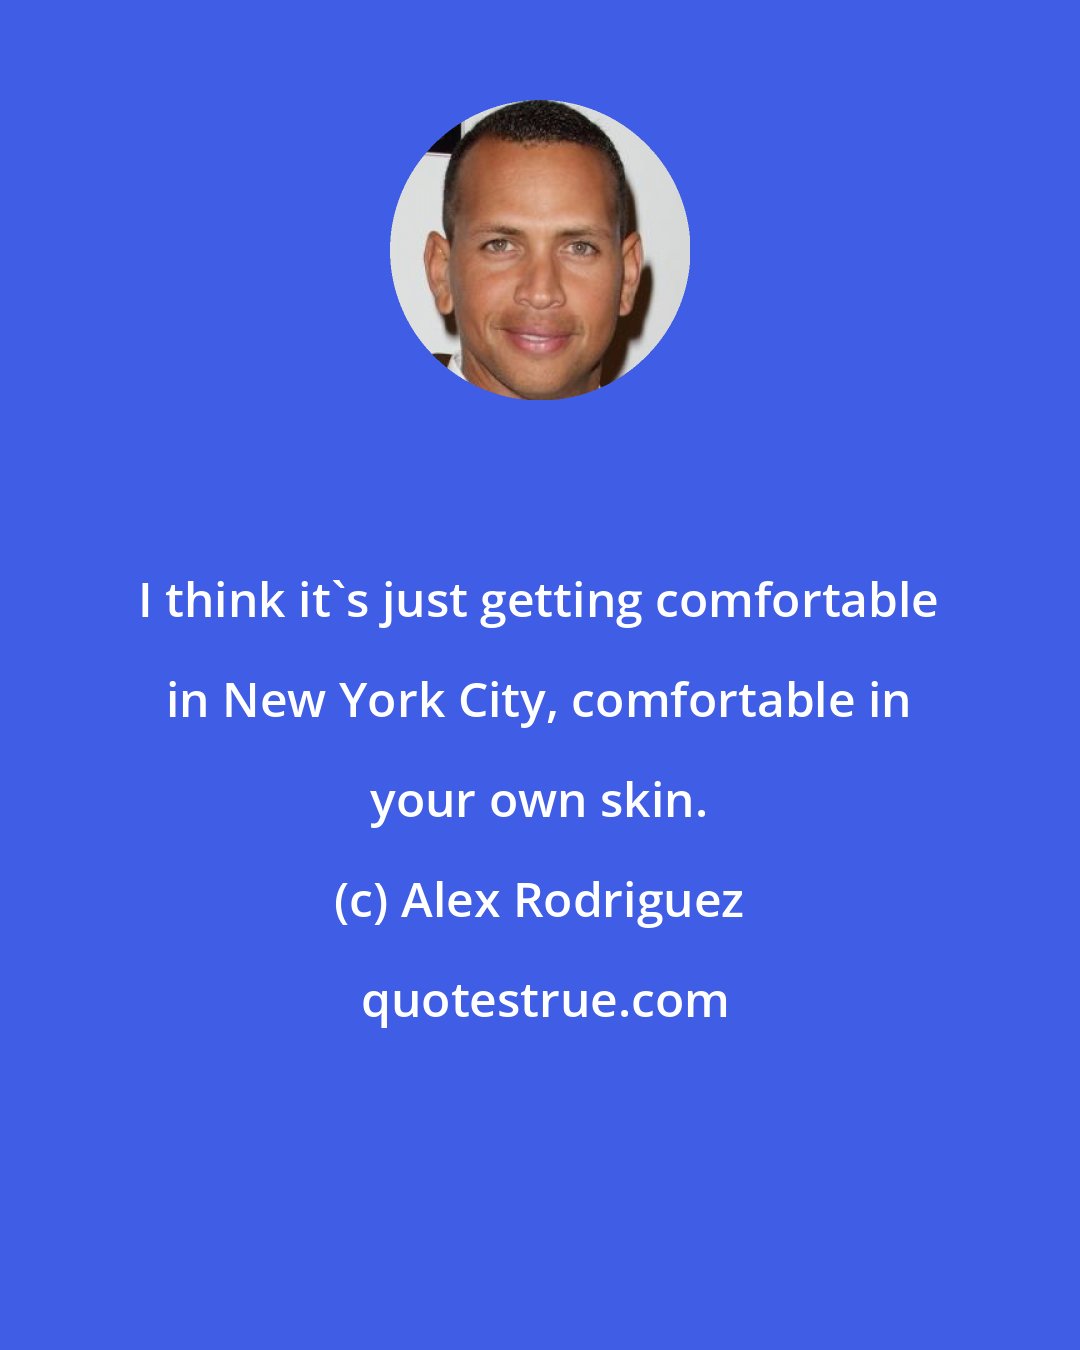 Alex Rodriguez: I think it's just getting comfortable in New York City, comfortable in your own skin.